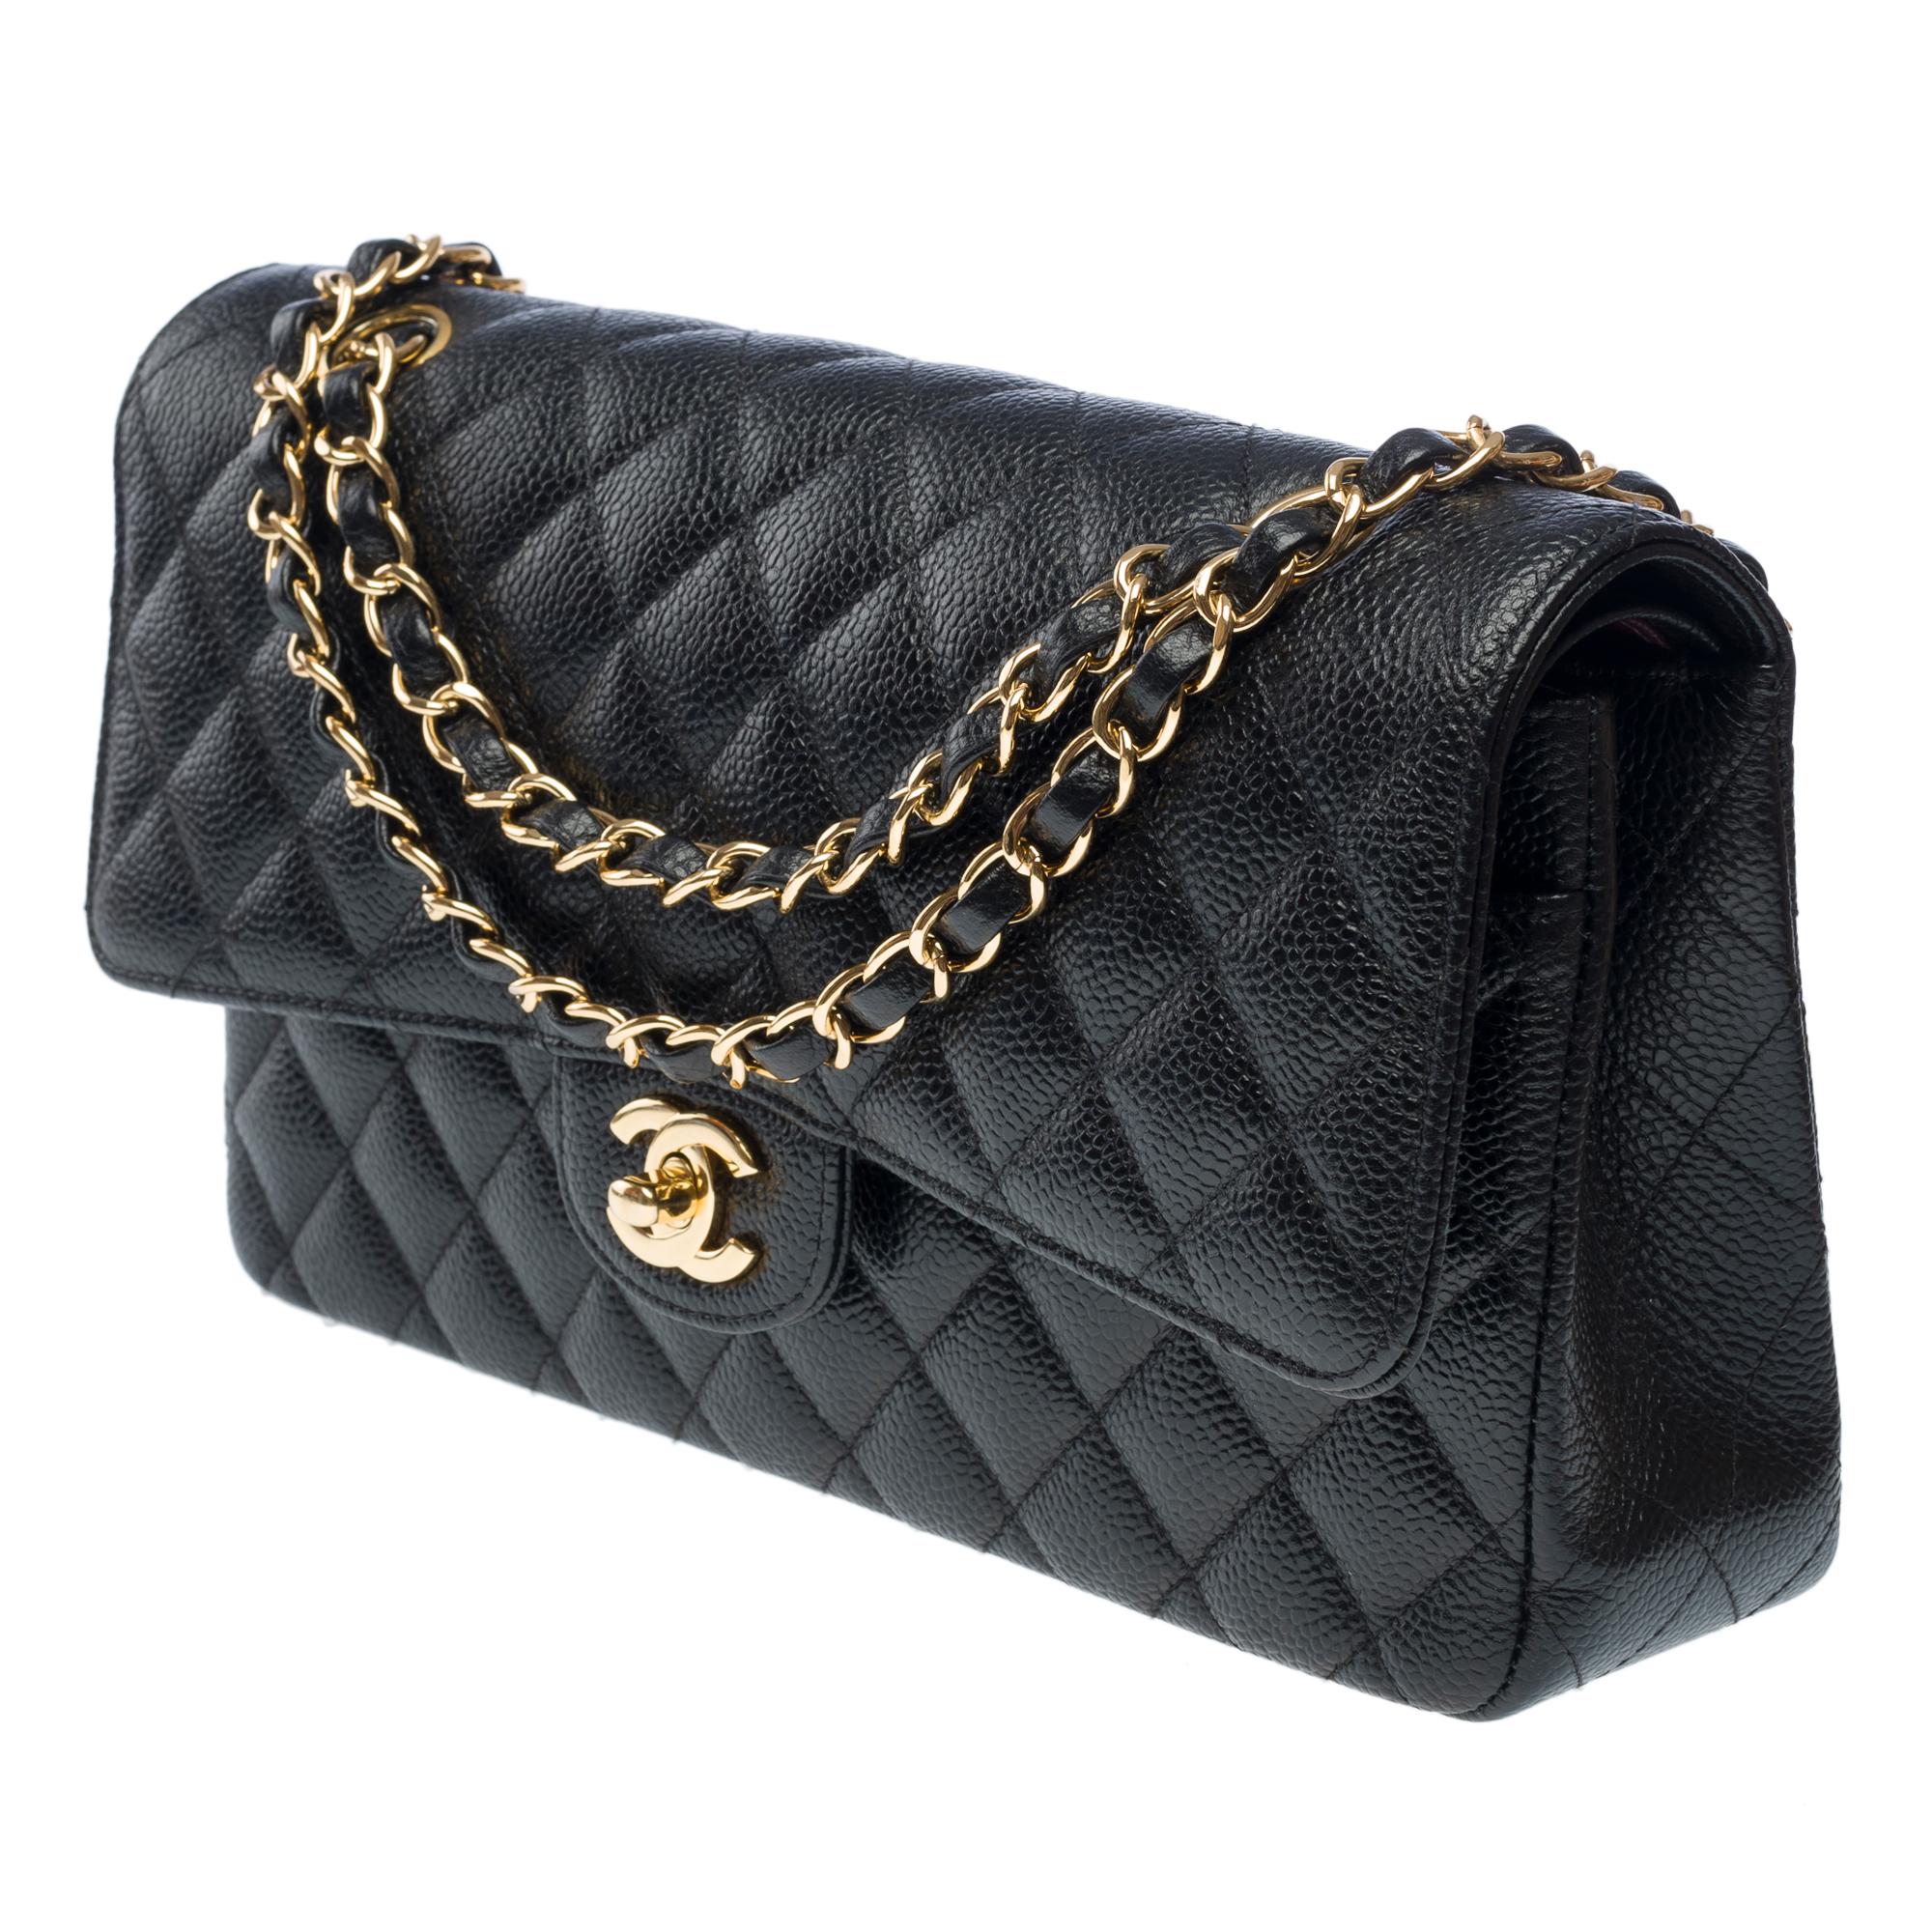 Chanel Timeless double flap shoulder bag in Black Quilted Caviar leather, GHW 1